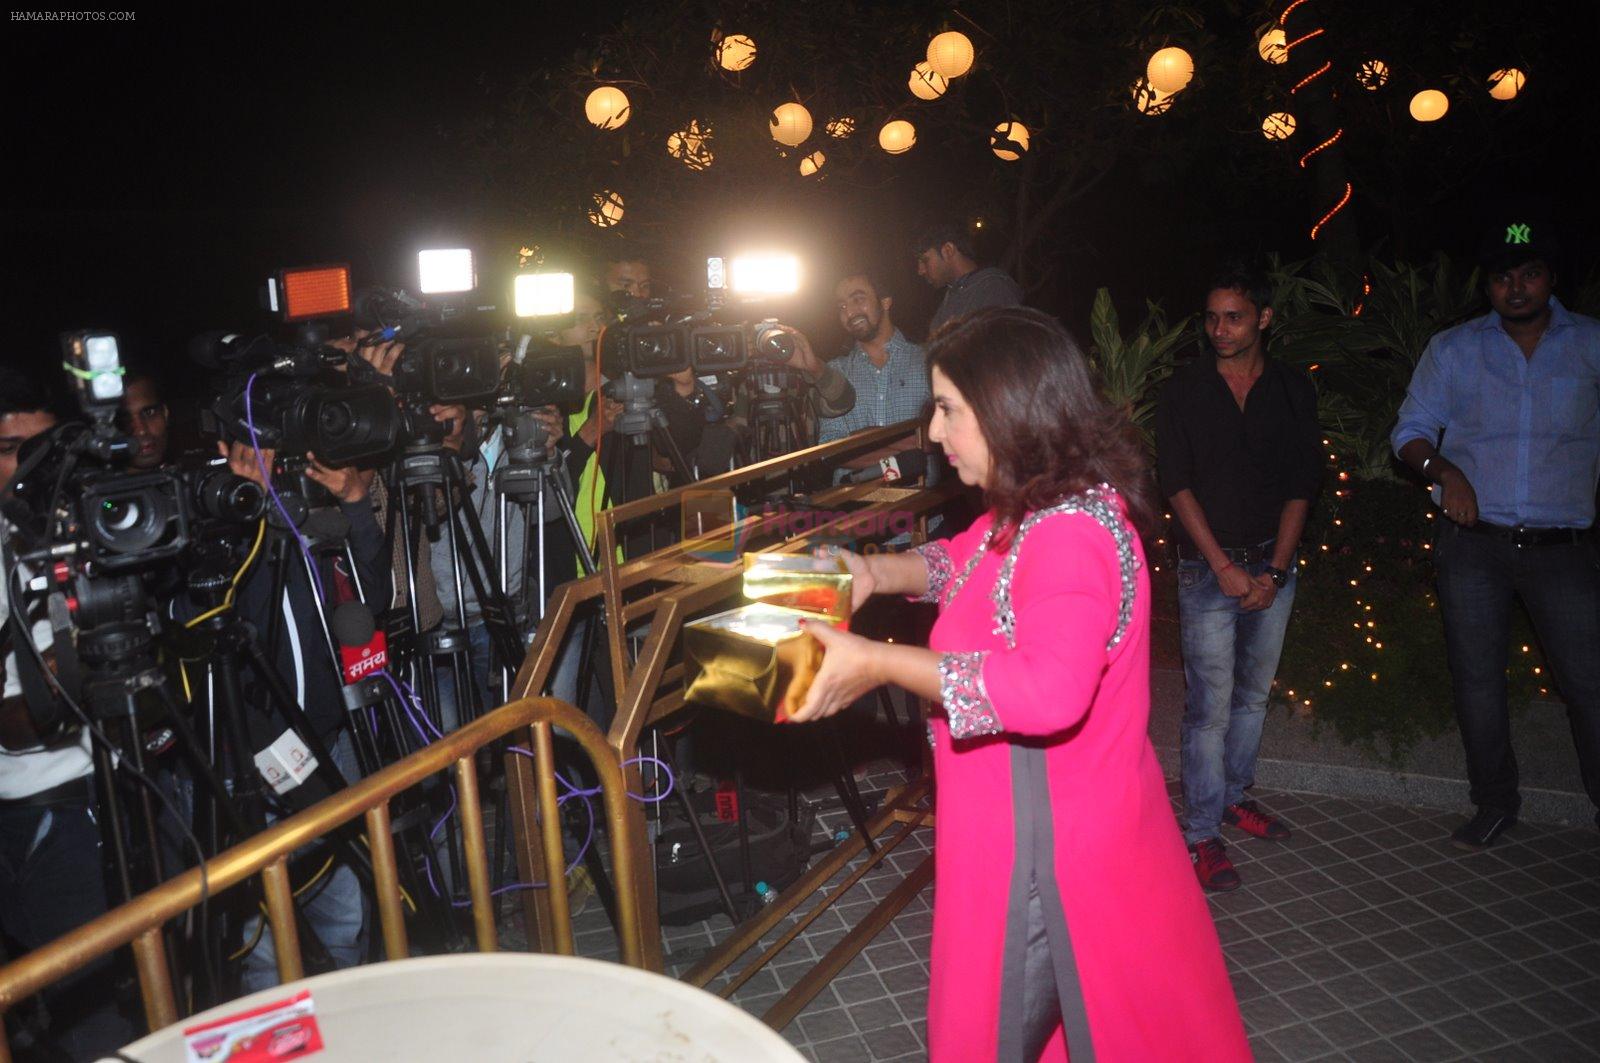 Farah Khan's birthday bash at her house in Andheri on 8th Jan 2015